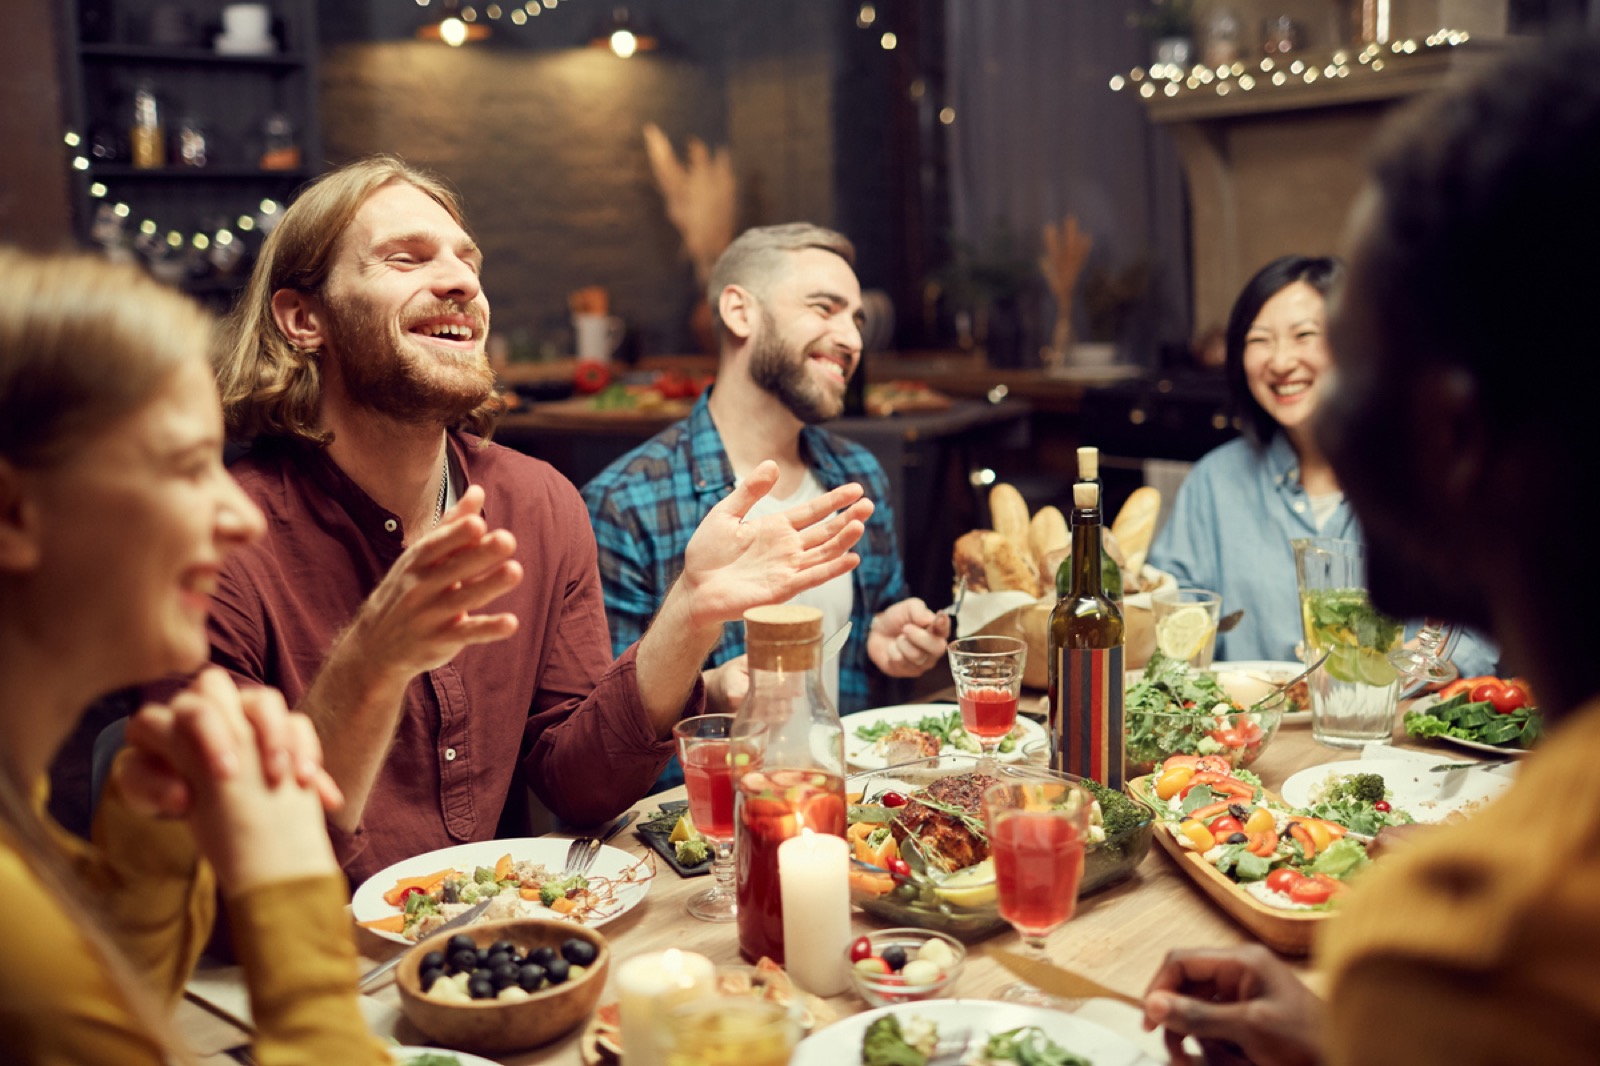 It’s Easy to Tell If You’re More American, British or Australian Just by Your Eating Habits People Laughing at Dinner Table